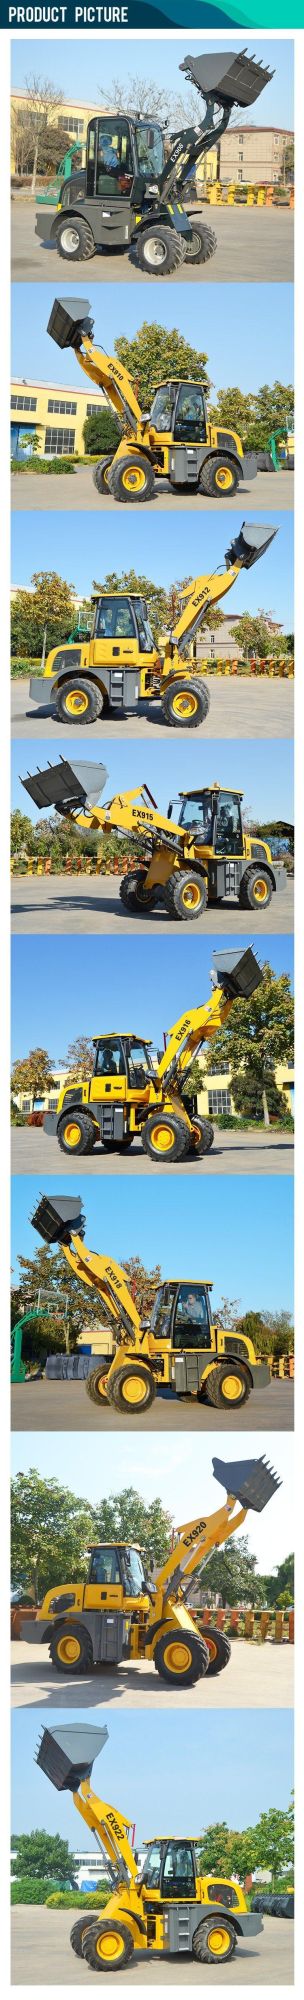 Huaya Small Loader China for Sale Ex915 Wheel Loaders Manufacturers